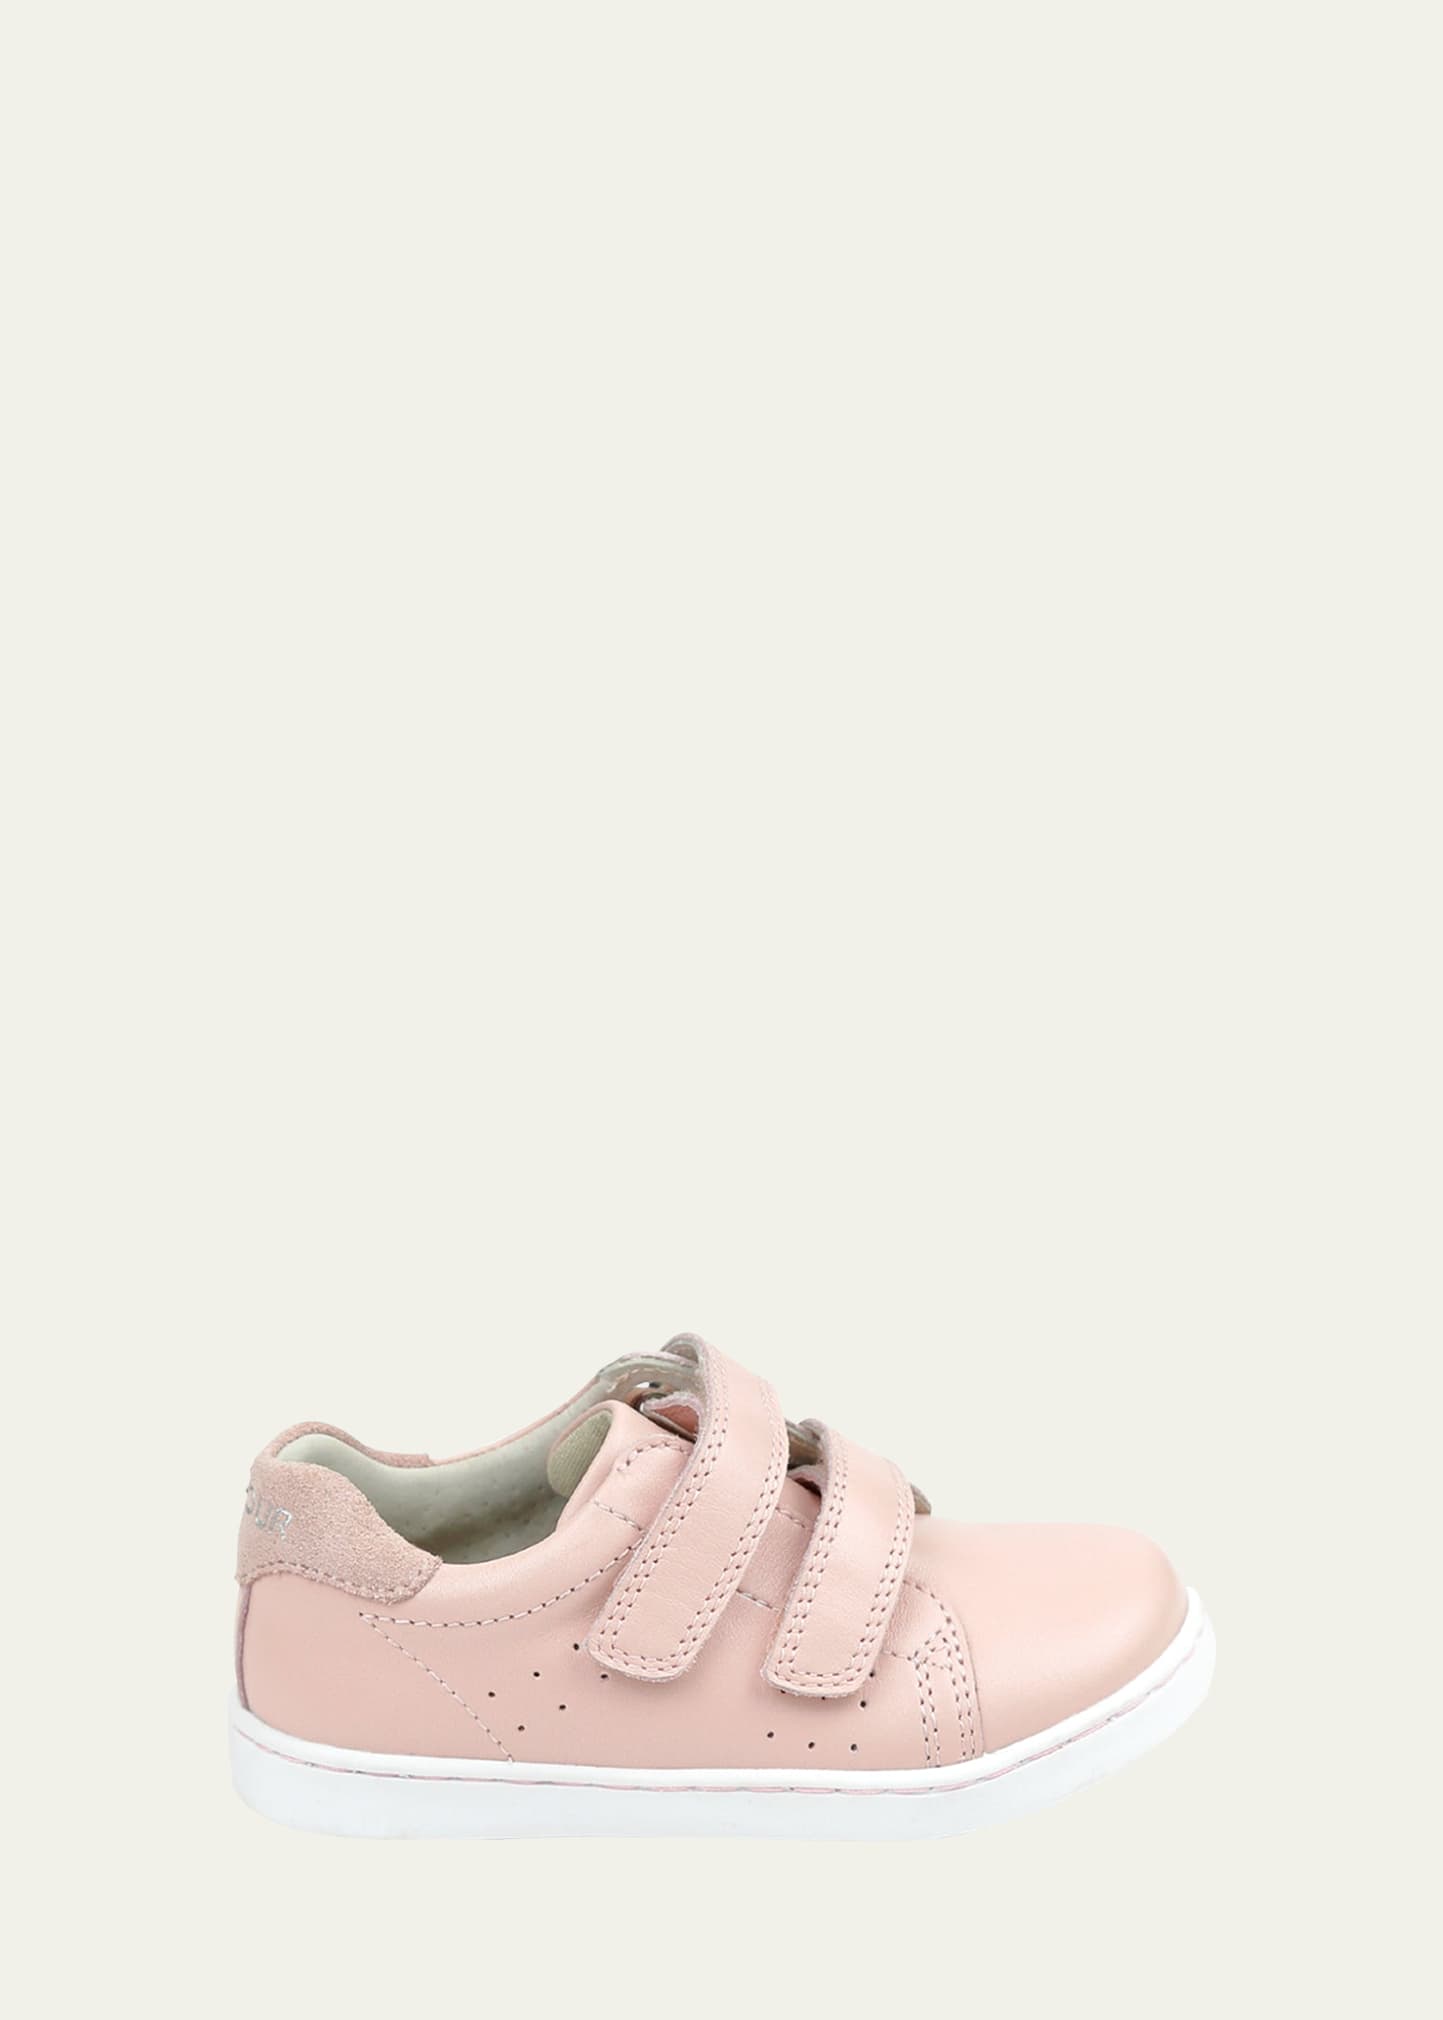 L'amour Shoes Girl's Kenzie Leather Sneakers, Baby/toddlers/kids In Light/pastel Pink